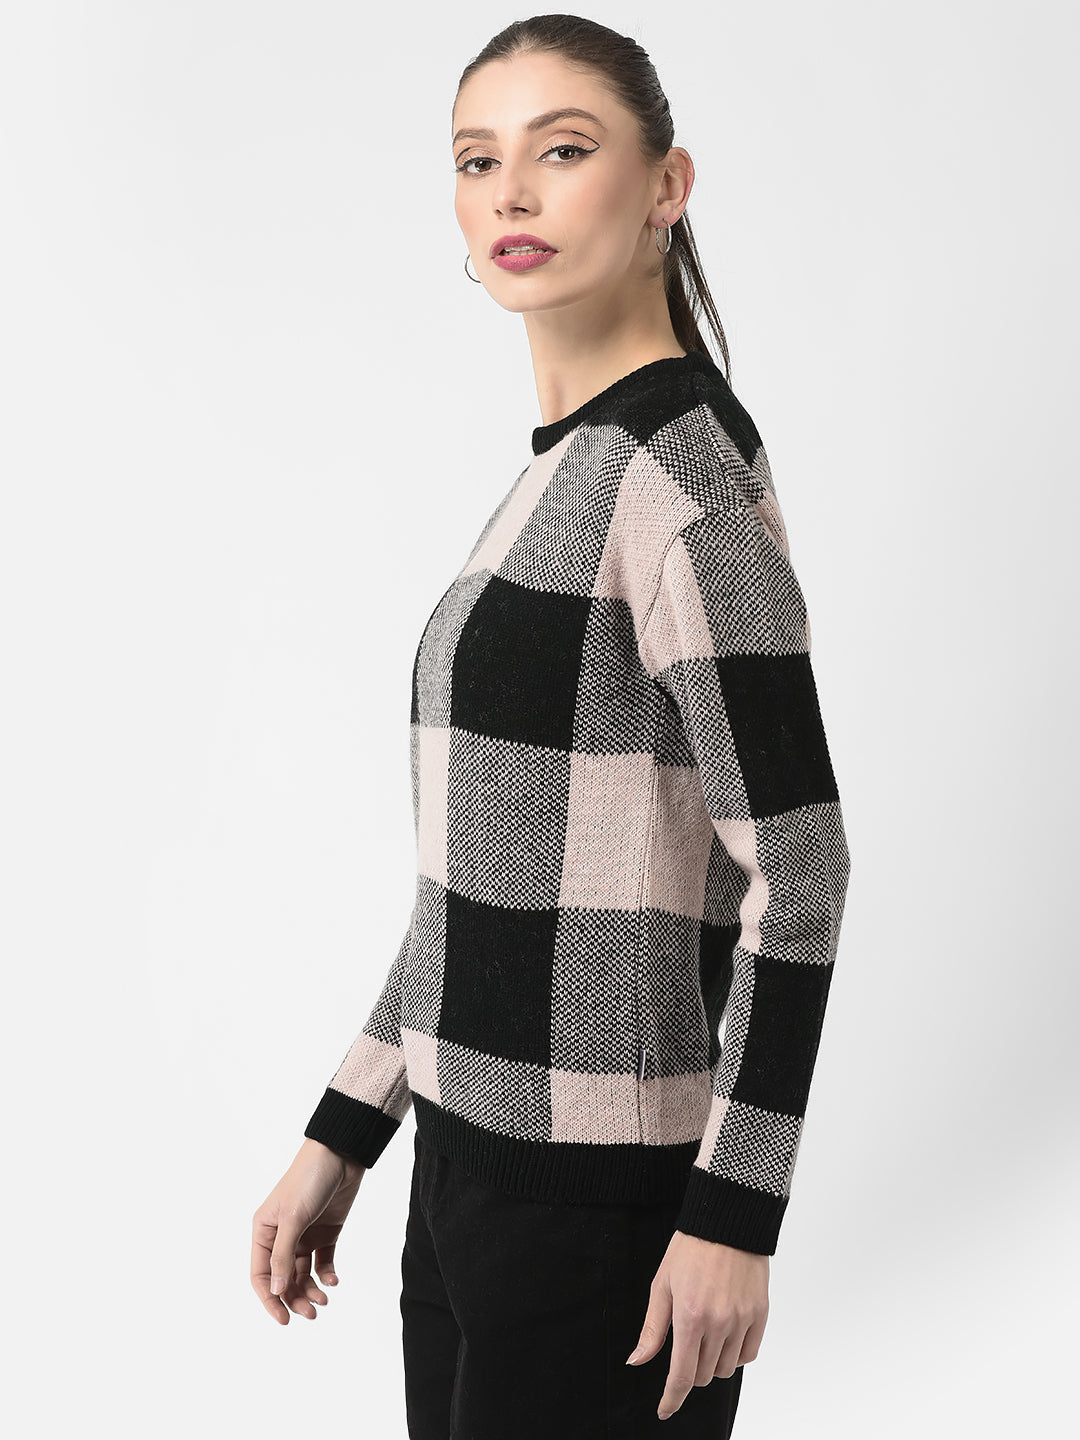  Black-Pink Checked Sweater